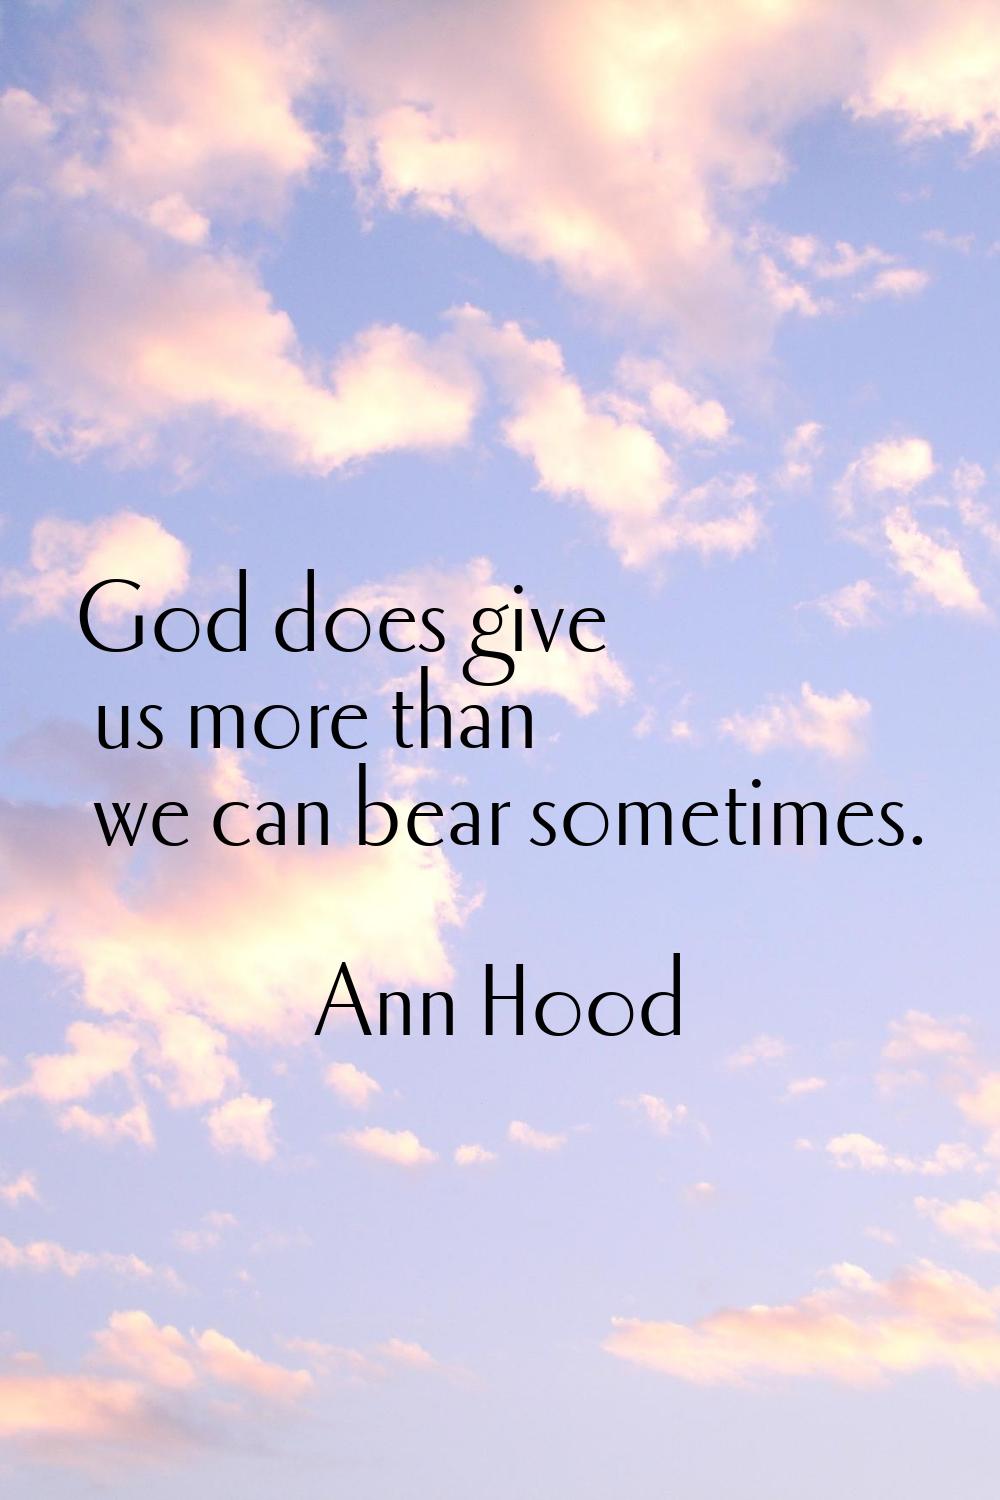 God does give us more than we can bear sometimes.